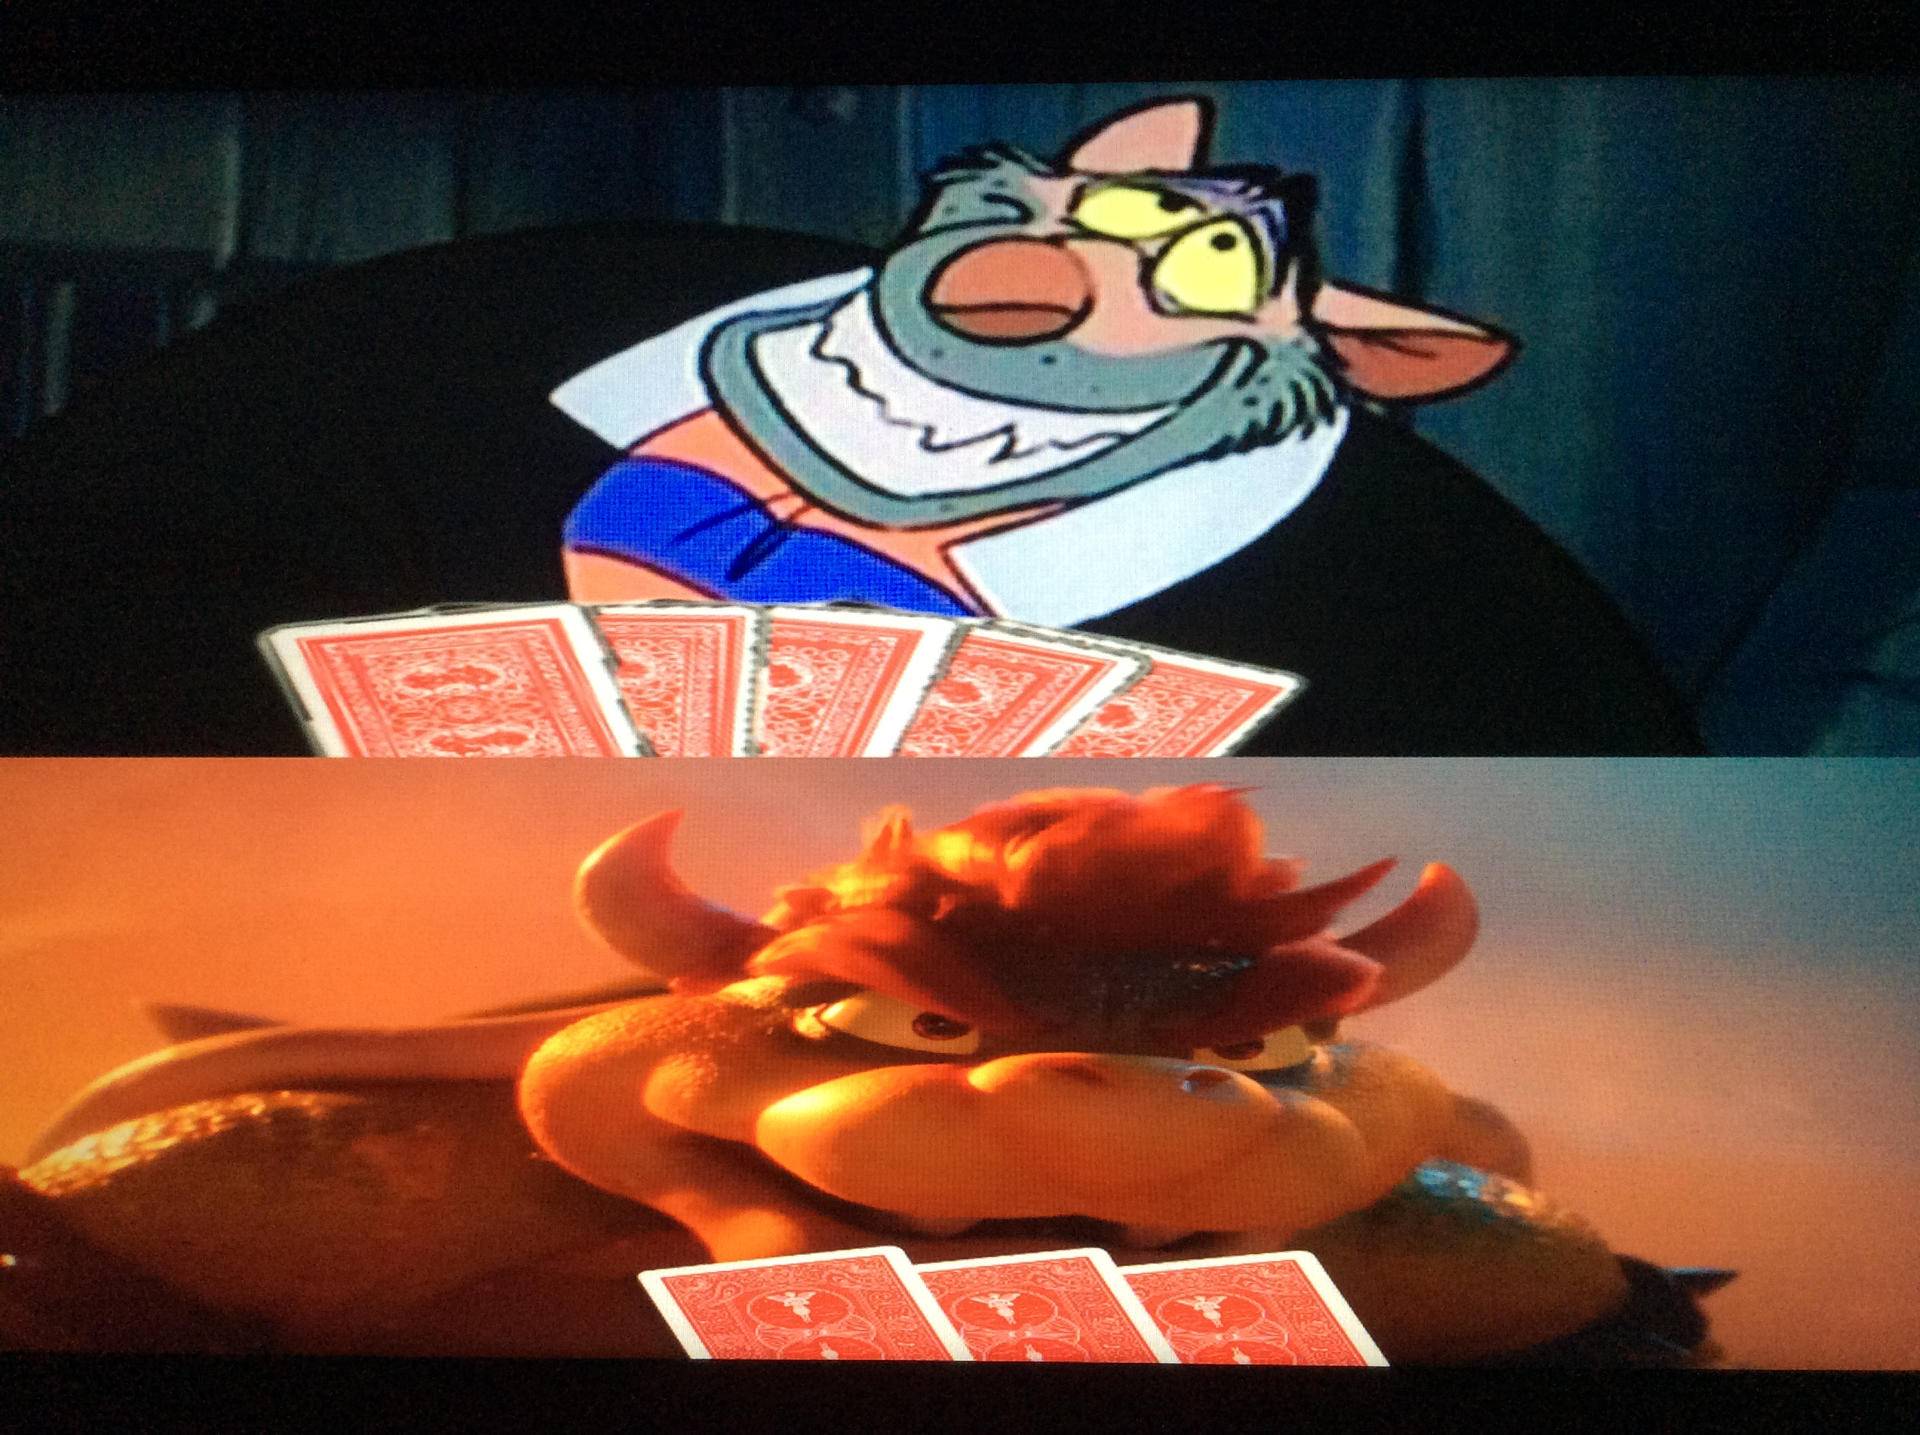 Bowser plays Poker with Ratigan by theartdragon27 on DeviantArt